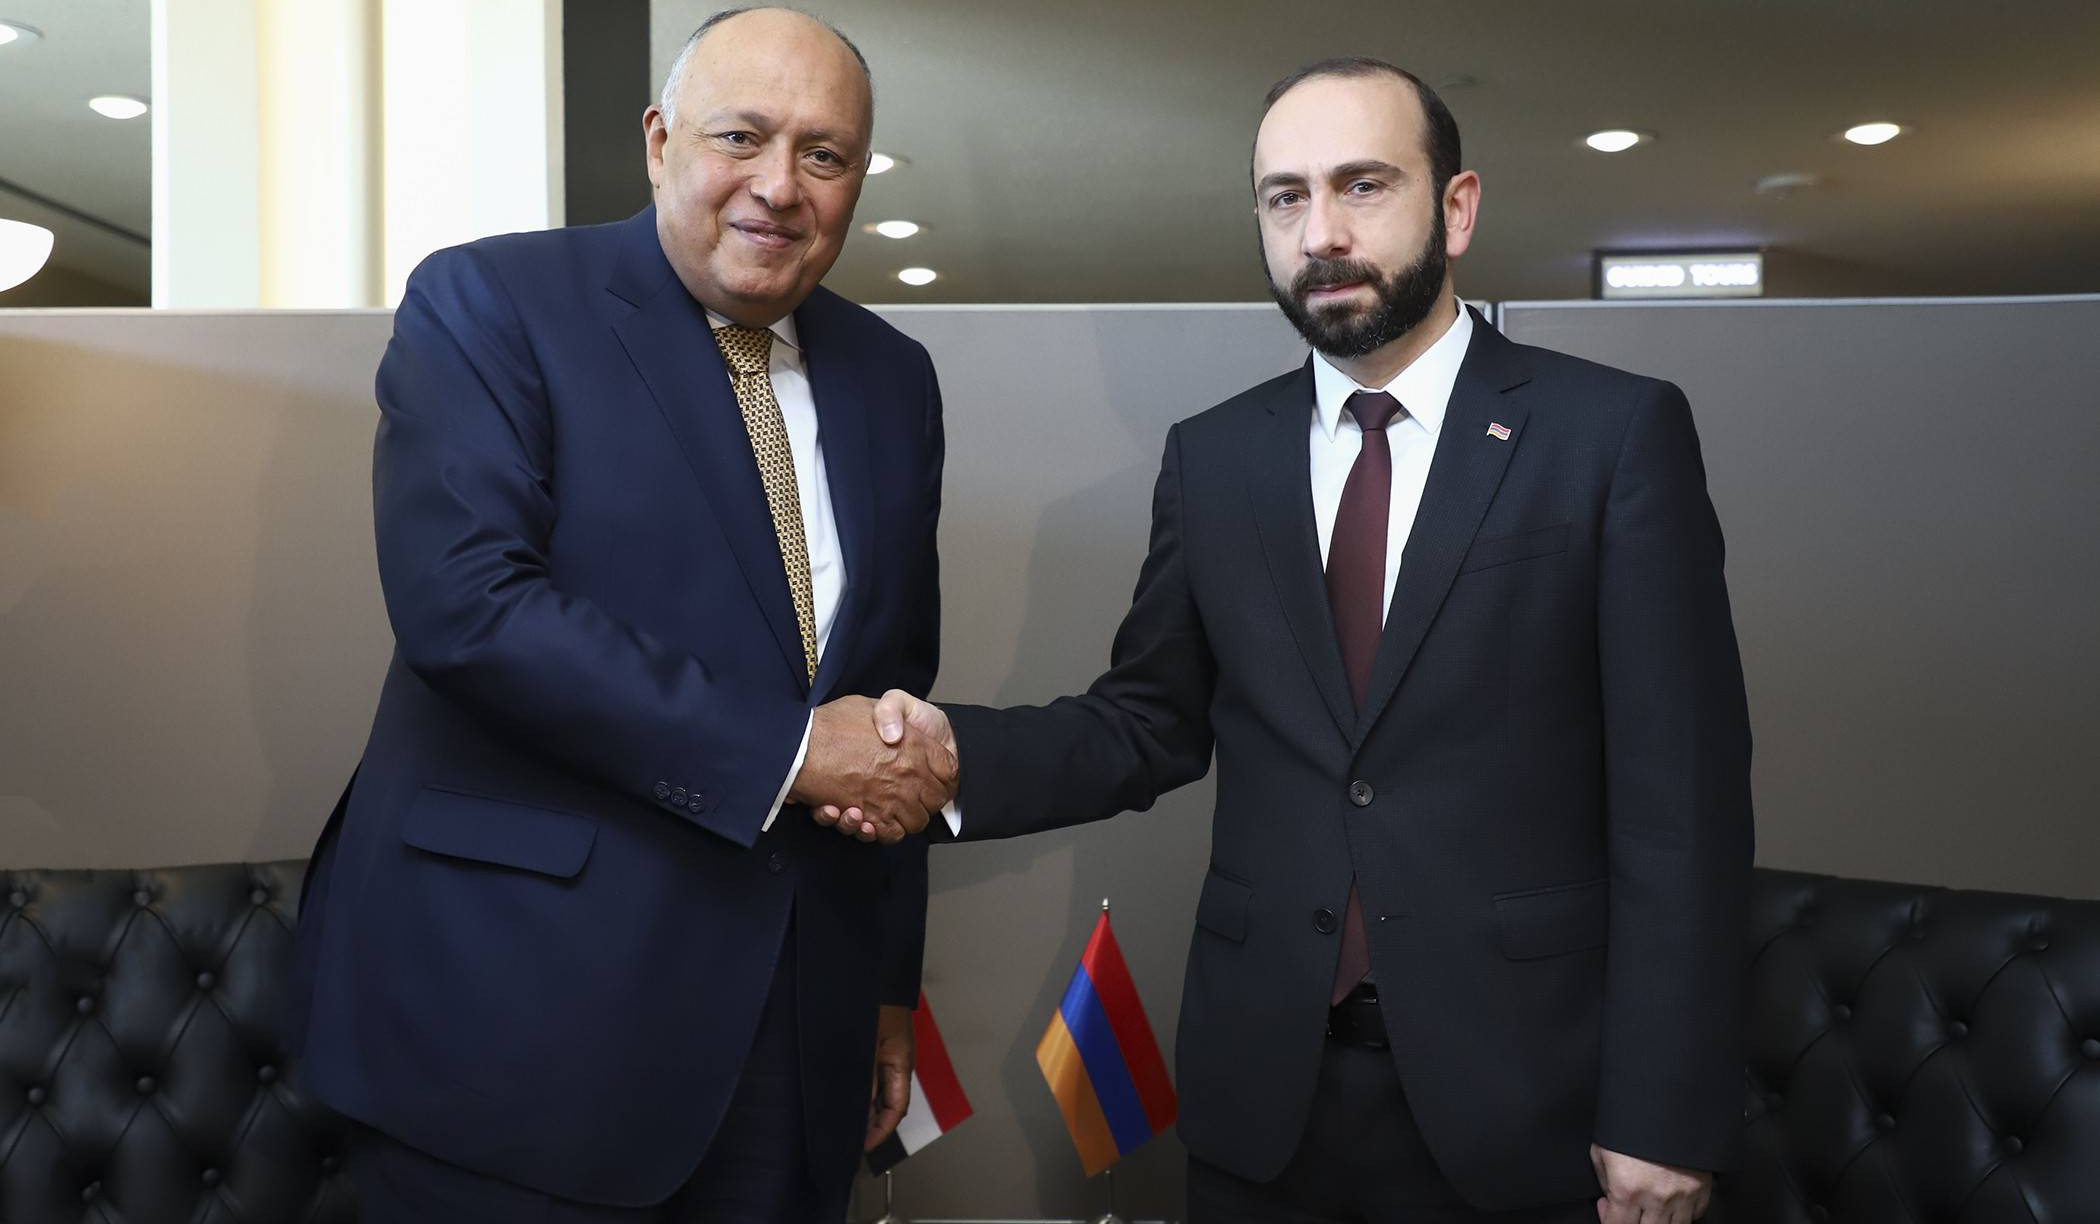 Meeting of Foreign Ministers of Armenia and Egypt in New York